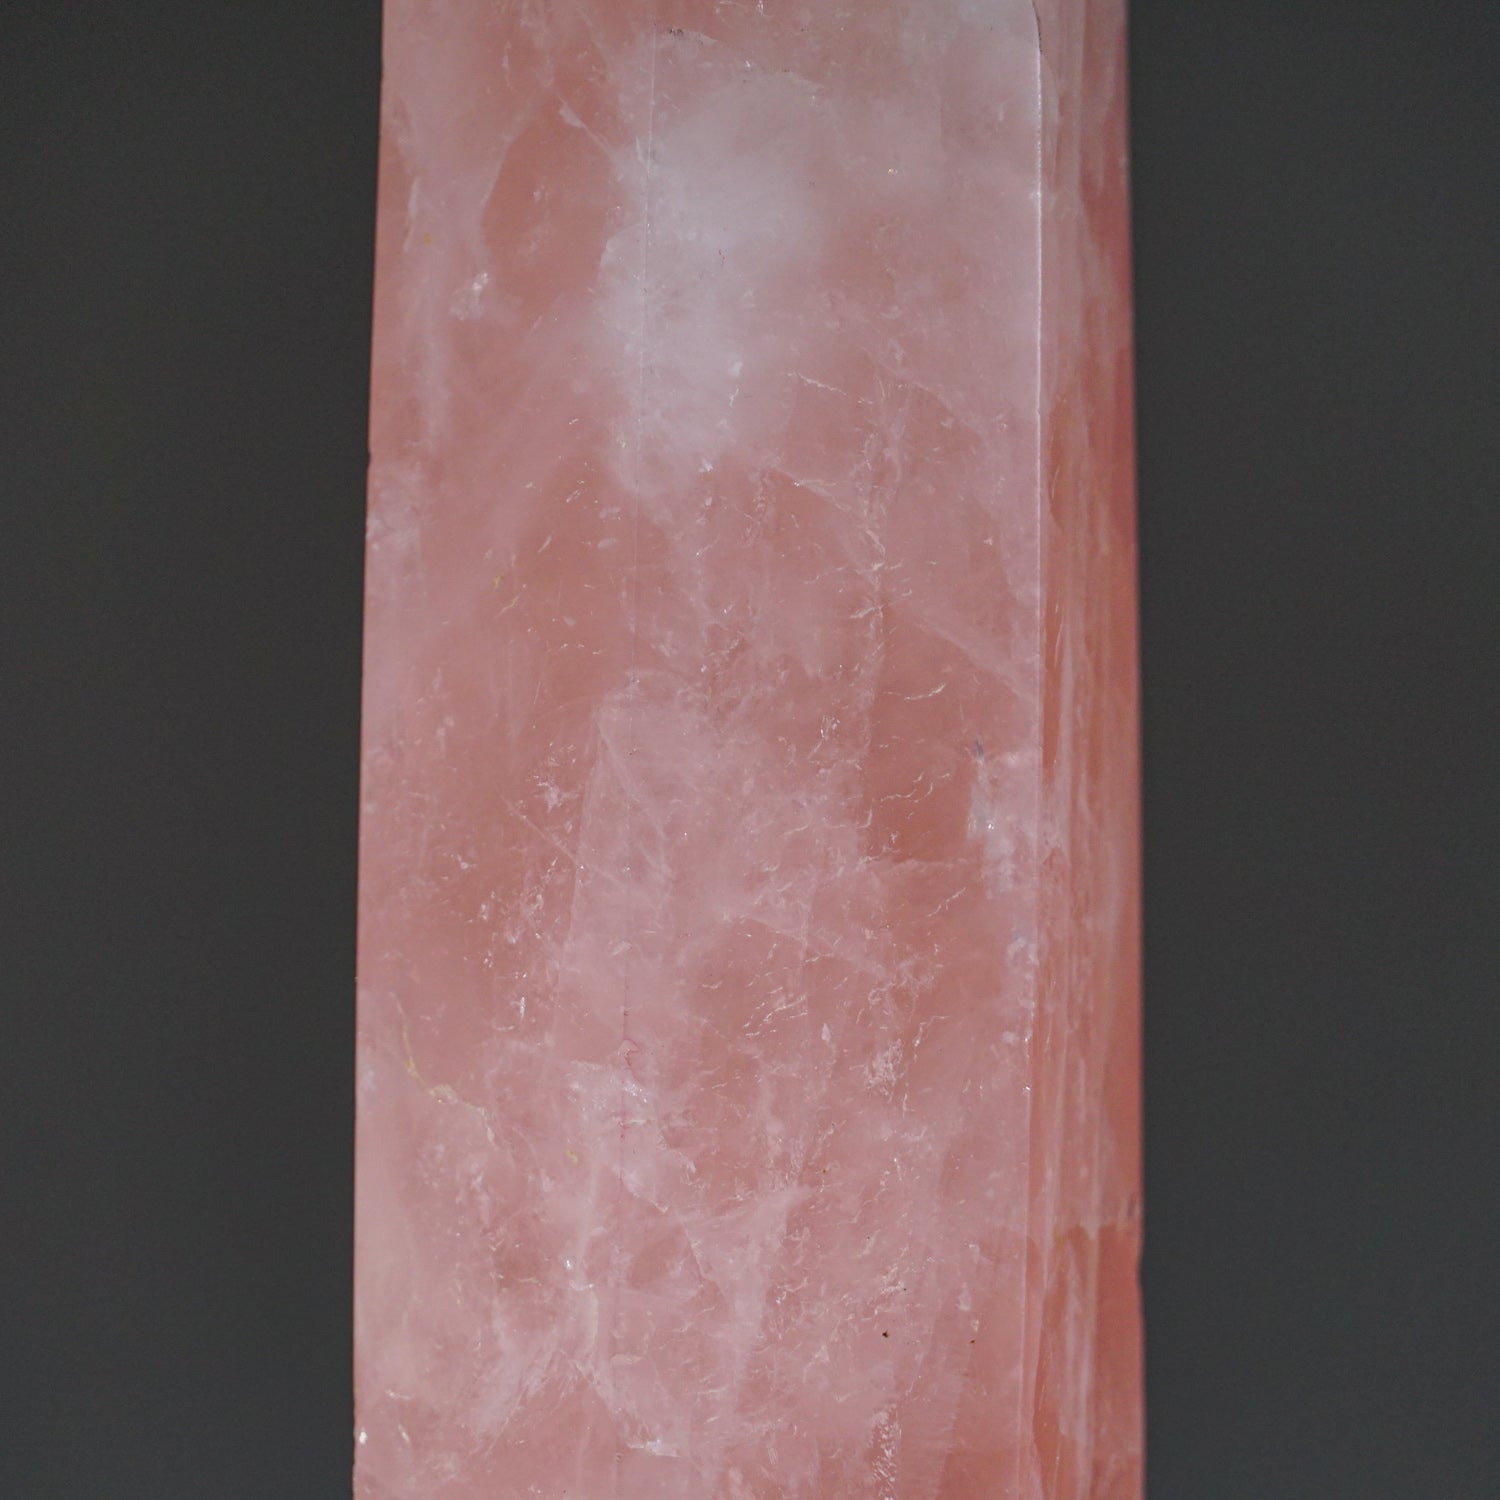 Genuine Rose Quartz Polished Point from Brazil (2.3 lbs)